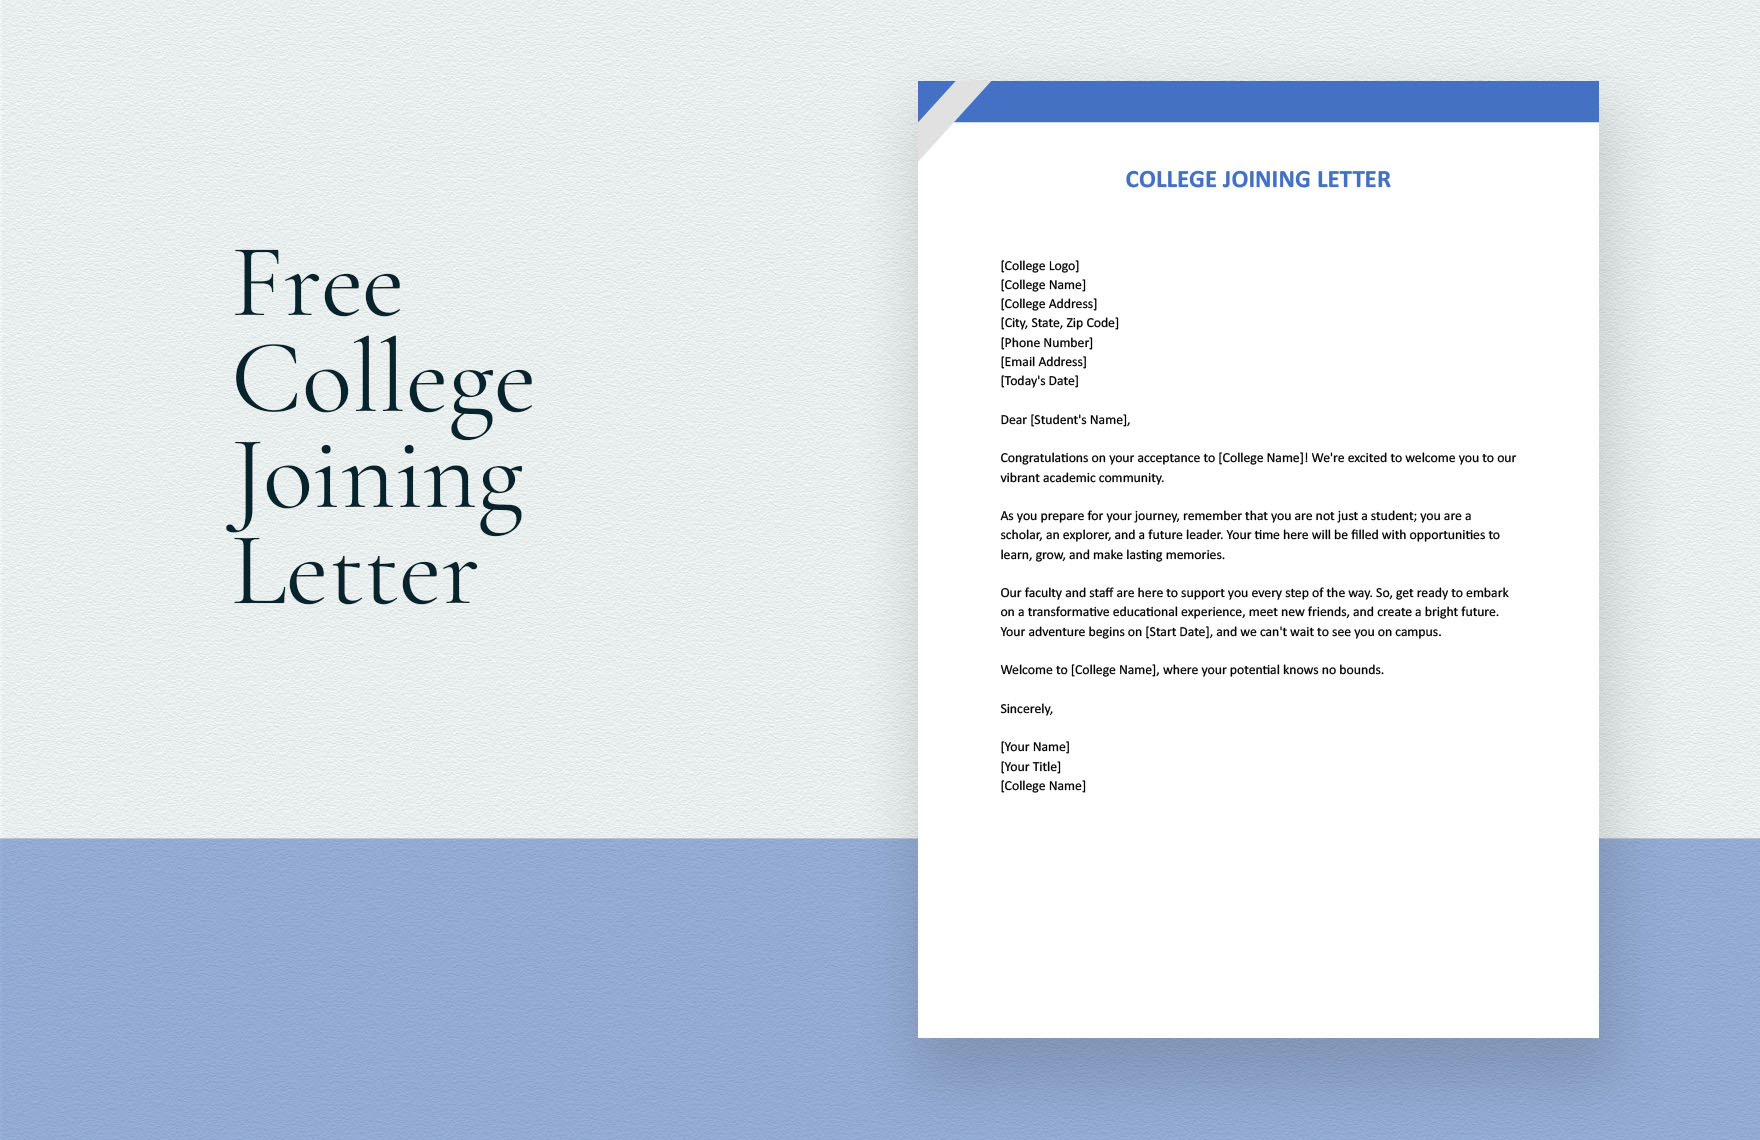 College Joining Letter in Word, Google Docs